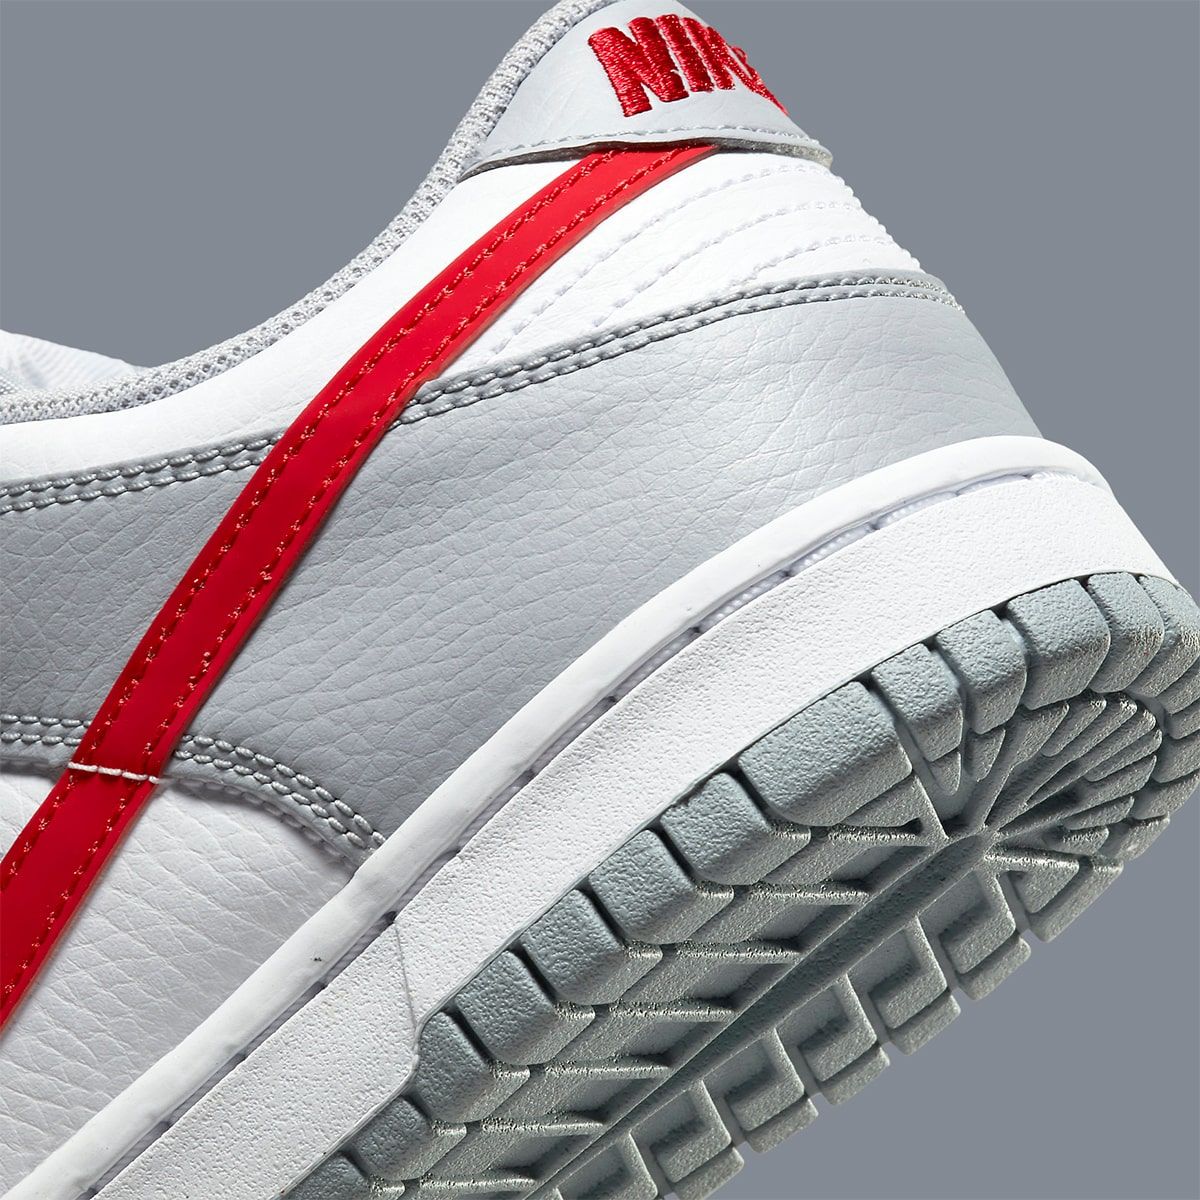 The Nike Dunk Low in Wolf Grey and University Red Arrives May 10